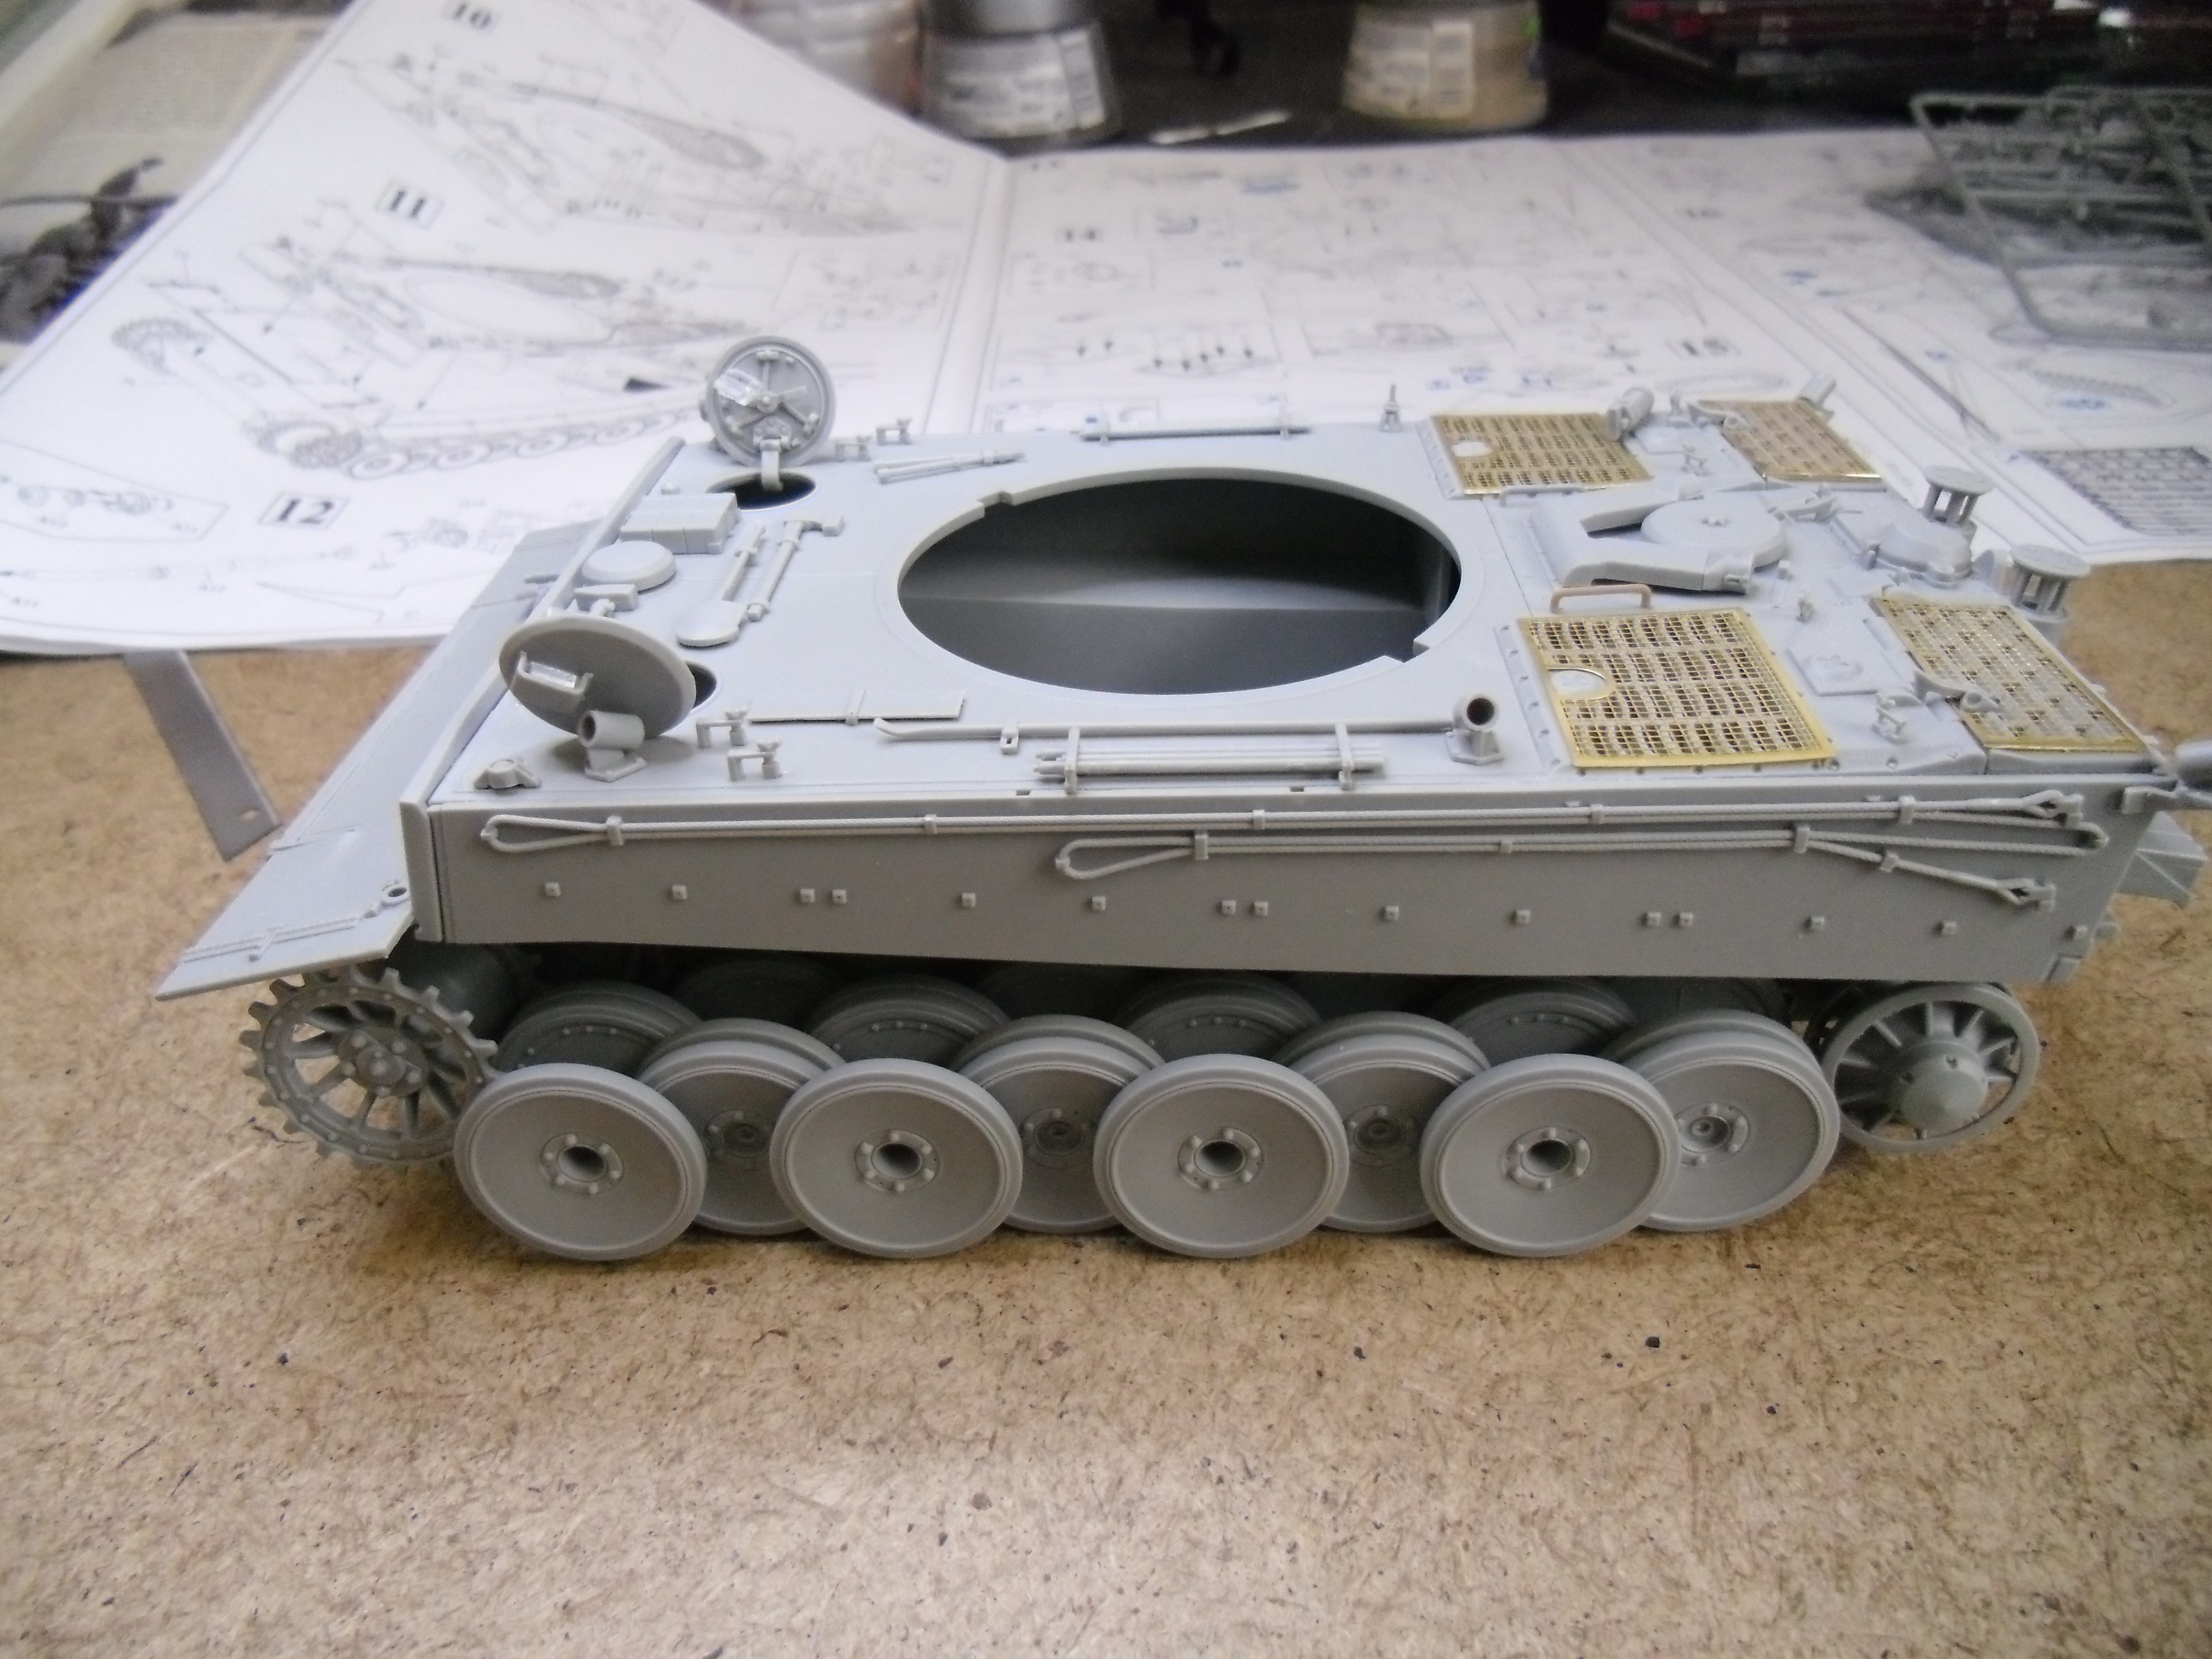 cyber-hobby 1/35ieme tiger1 early production opération Citadelle 14022201392017239912005219